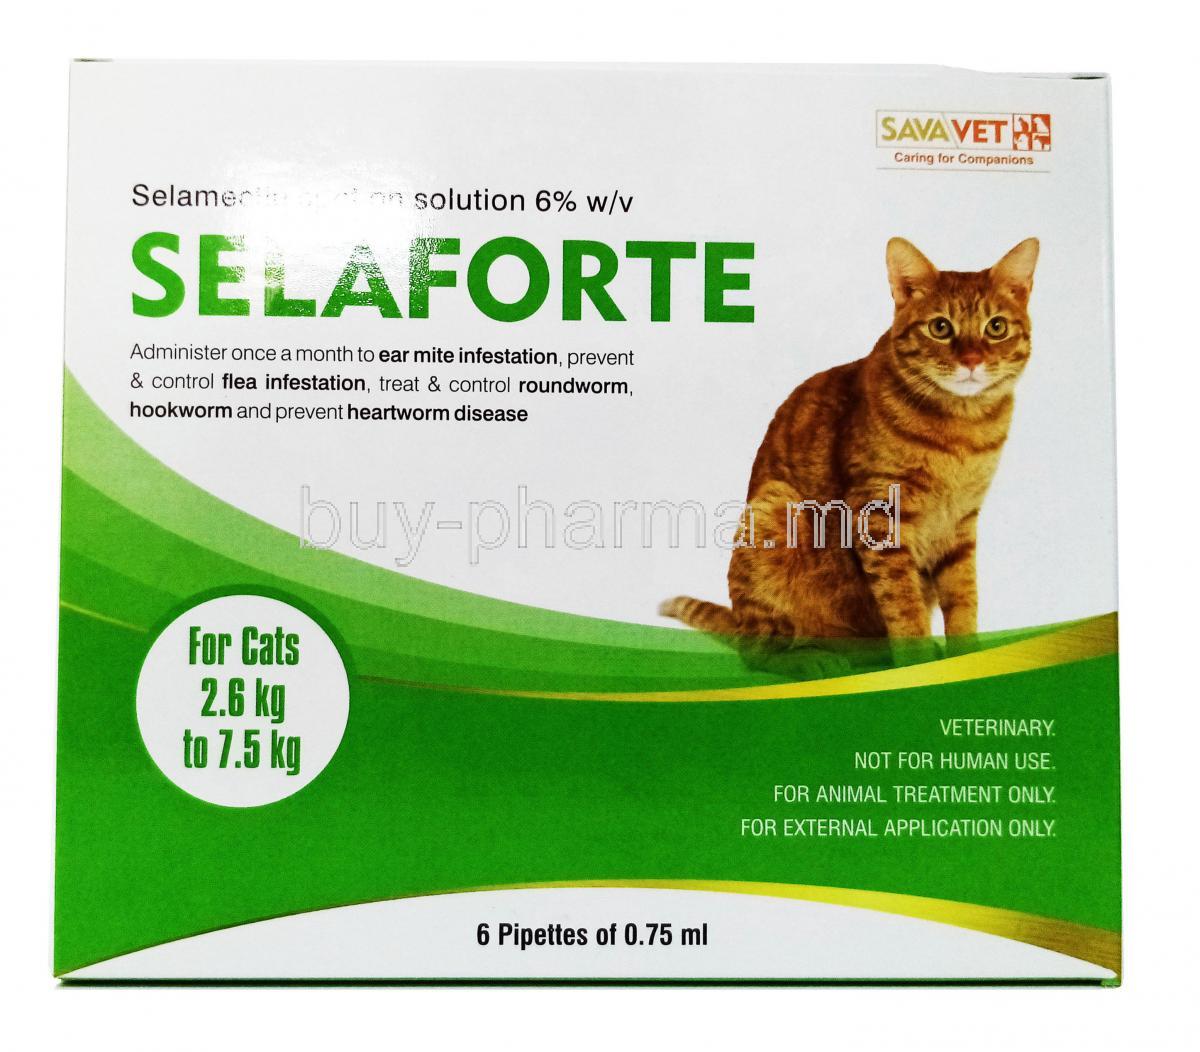 Selaforte For Cats, Selamectin, 45mg / 0.75ml Spot On for Cat (2.6kg to 7.5kg) x 6 Pipettes, Box Front